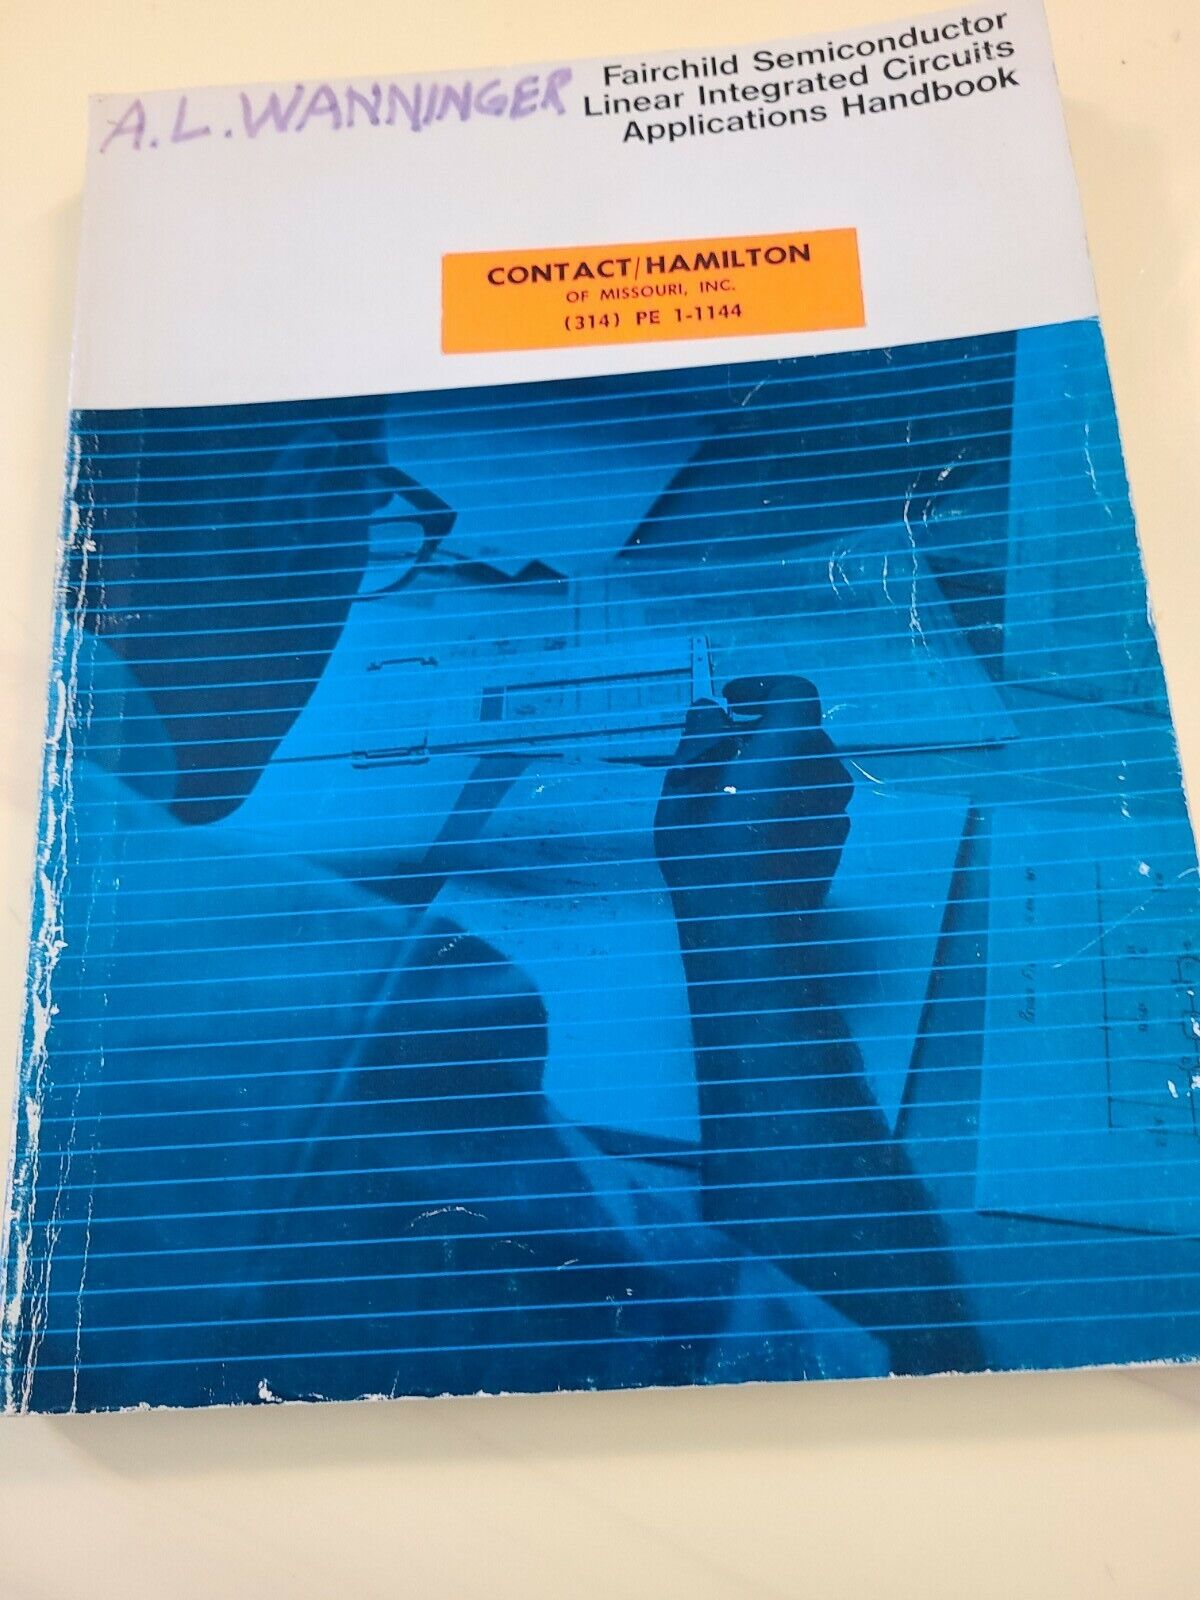 FAIRCHILD SEMICONDUCTOR LINEAR INTEGRATED CIRCUITS APPILCATIONS HANDBOOK RARE 